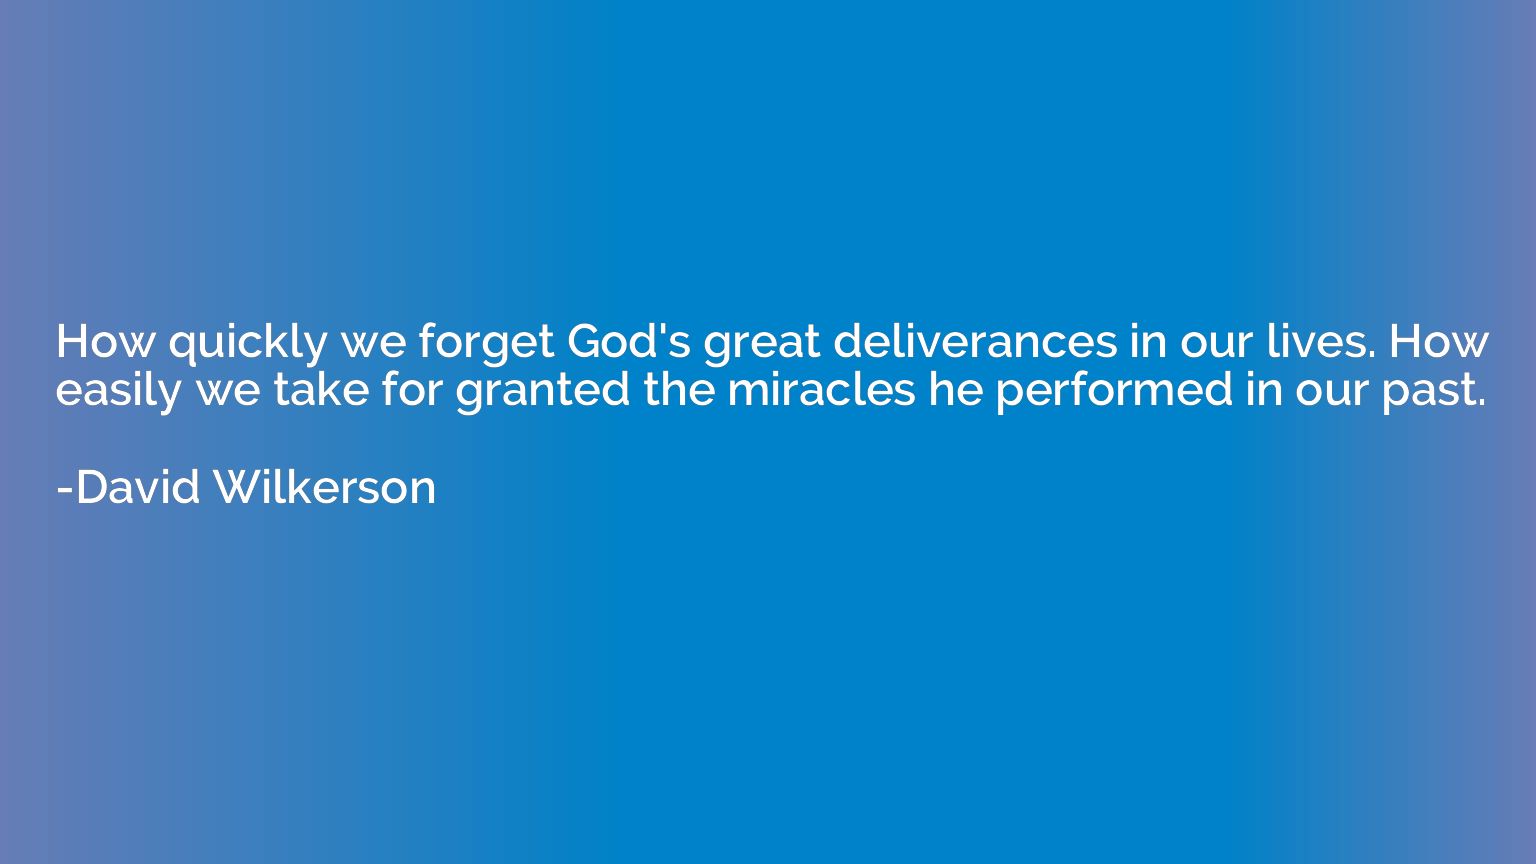 How quickly we forget God's great deliverances in our lives.